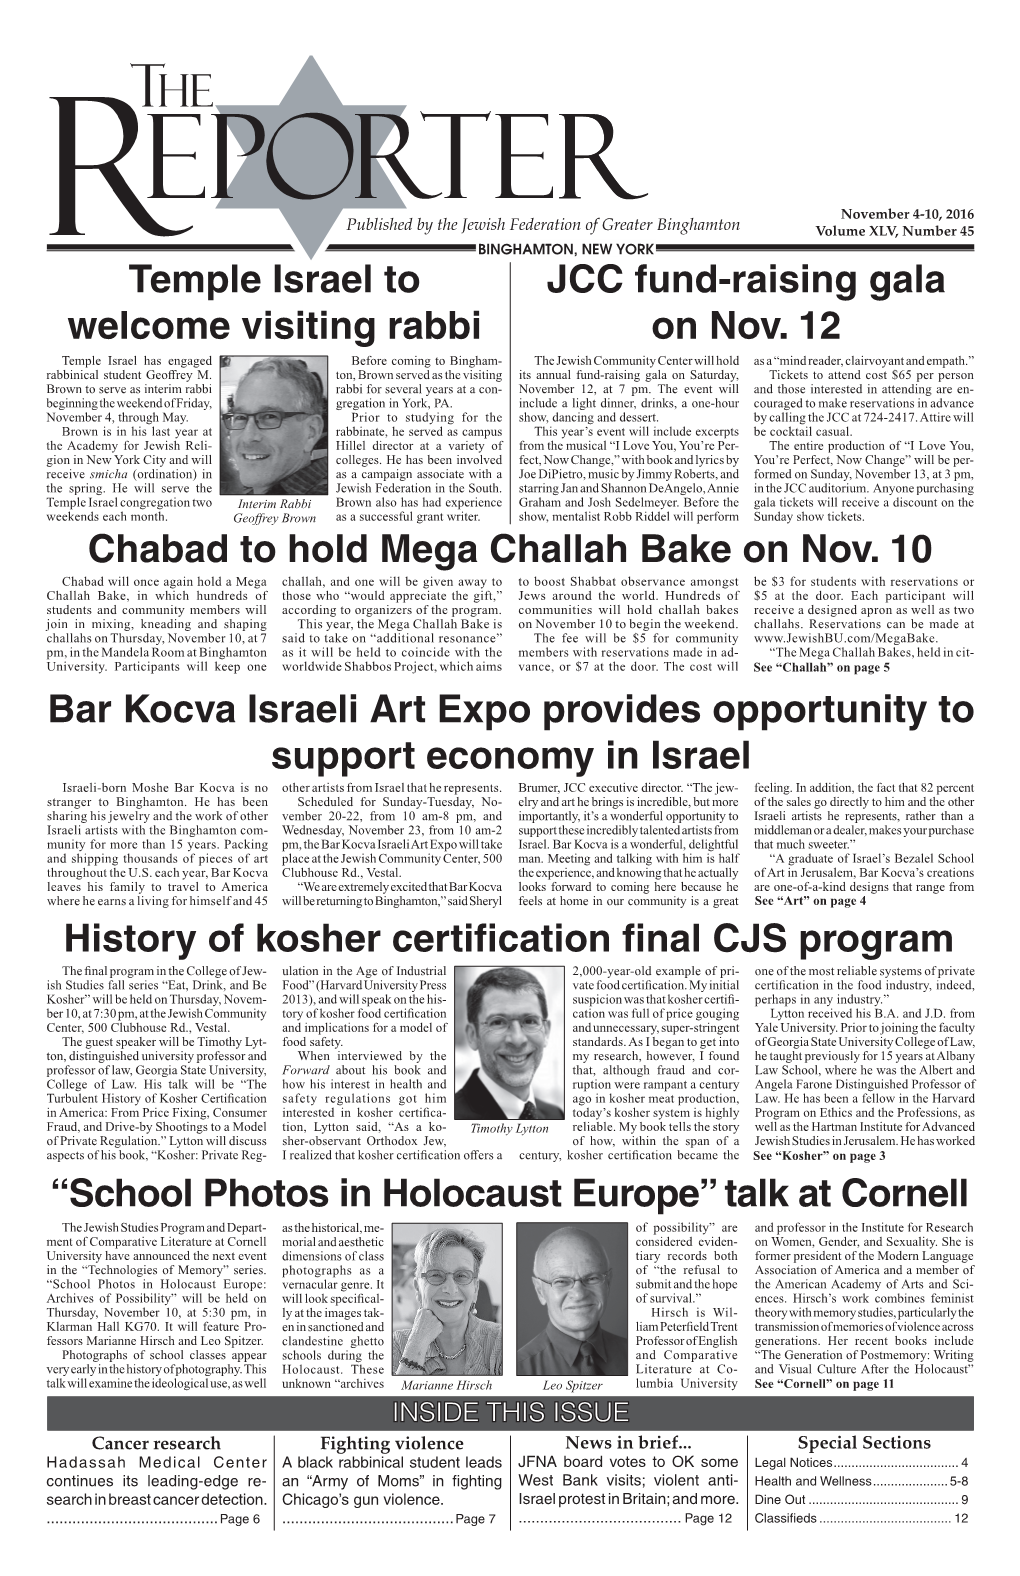 History of Kosher Certification Final CJS Program Temple Israel to Welcome Visiting Rabbi Chabad to Hold Mega Challah Bake on No